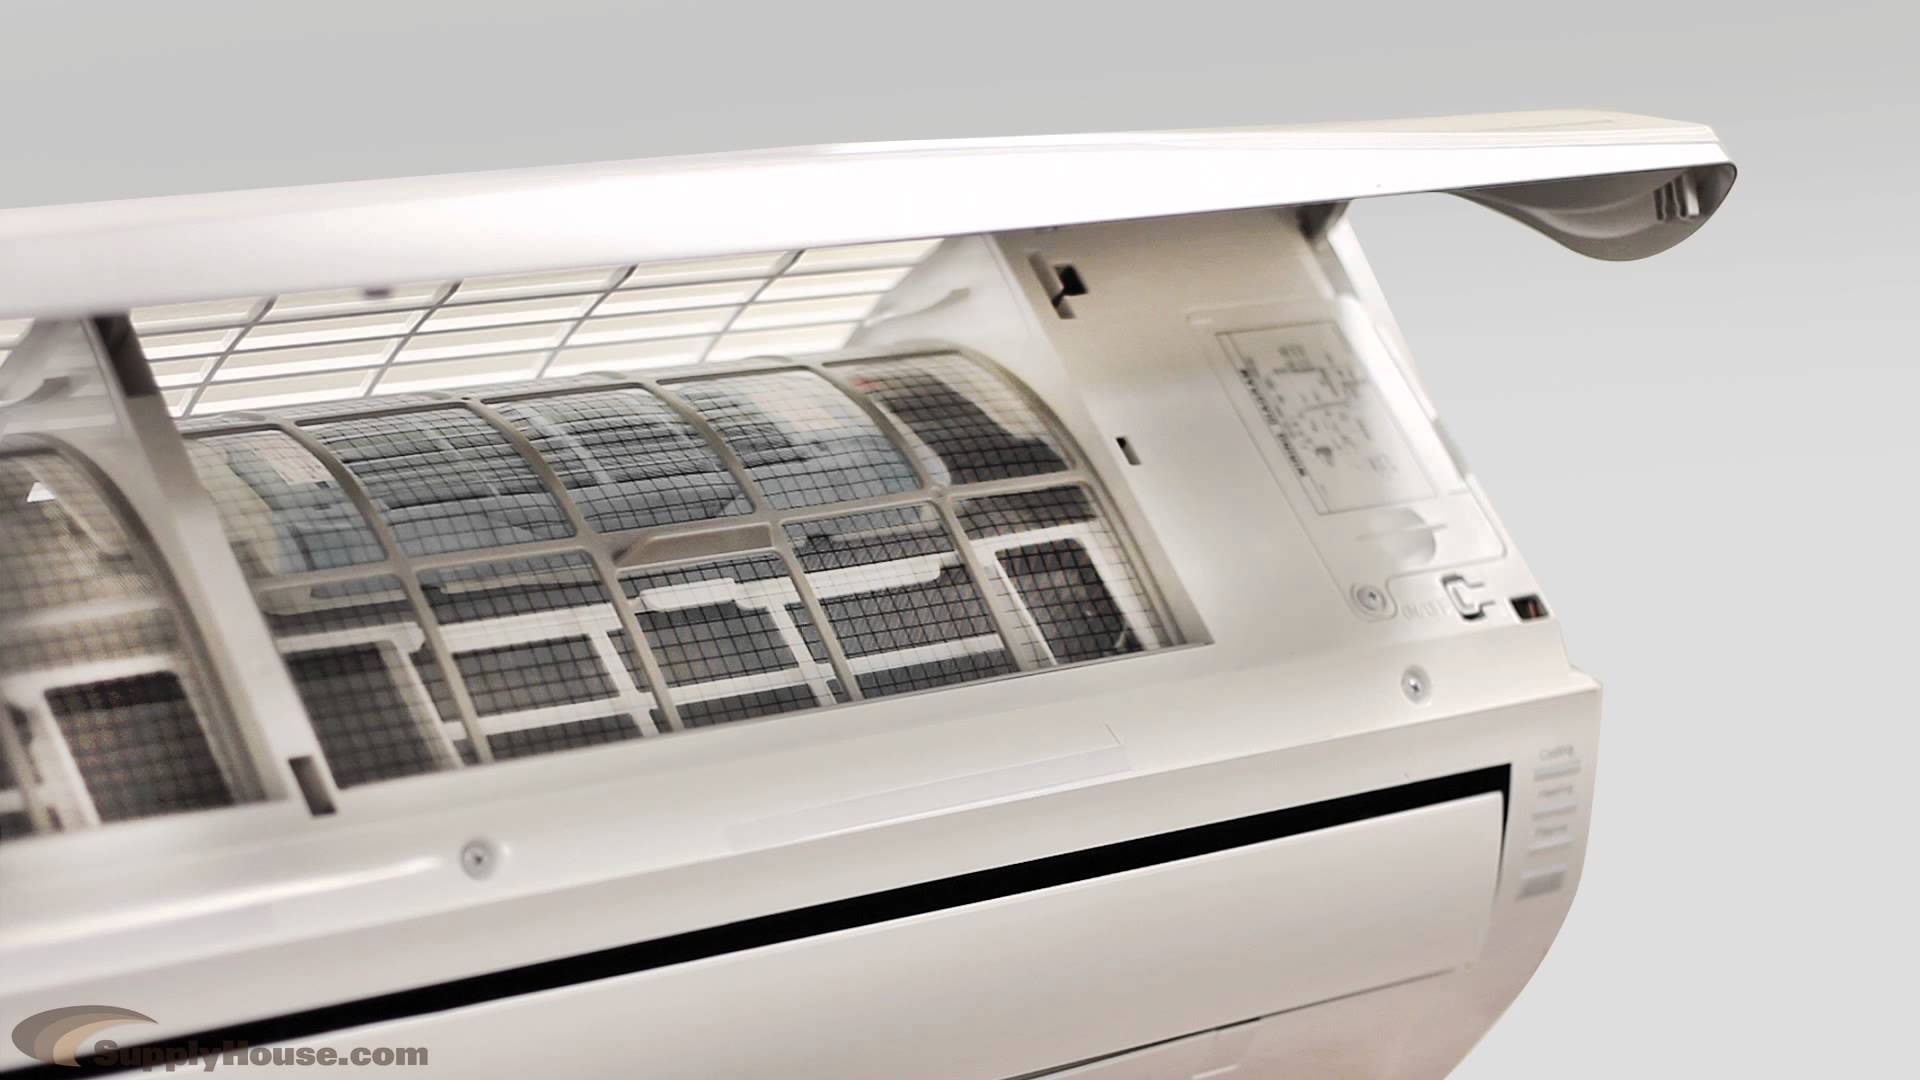 J S Home Services, AC Repairs In Chennai,Best AC Services In Chennai,AC Repairs And Services In Chennai
